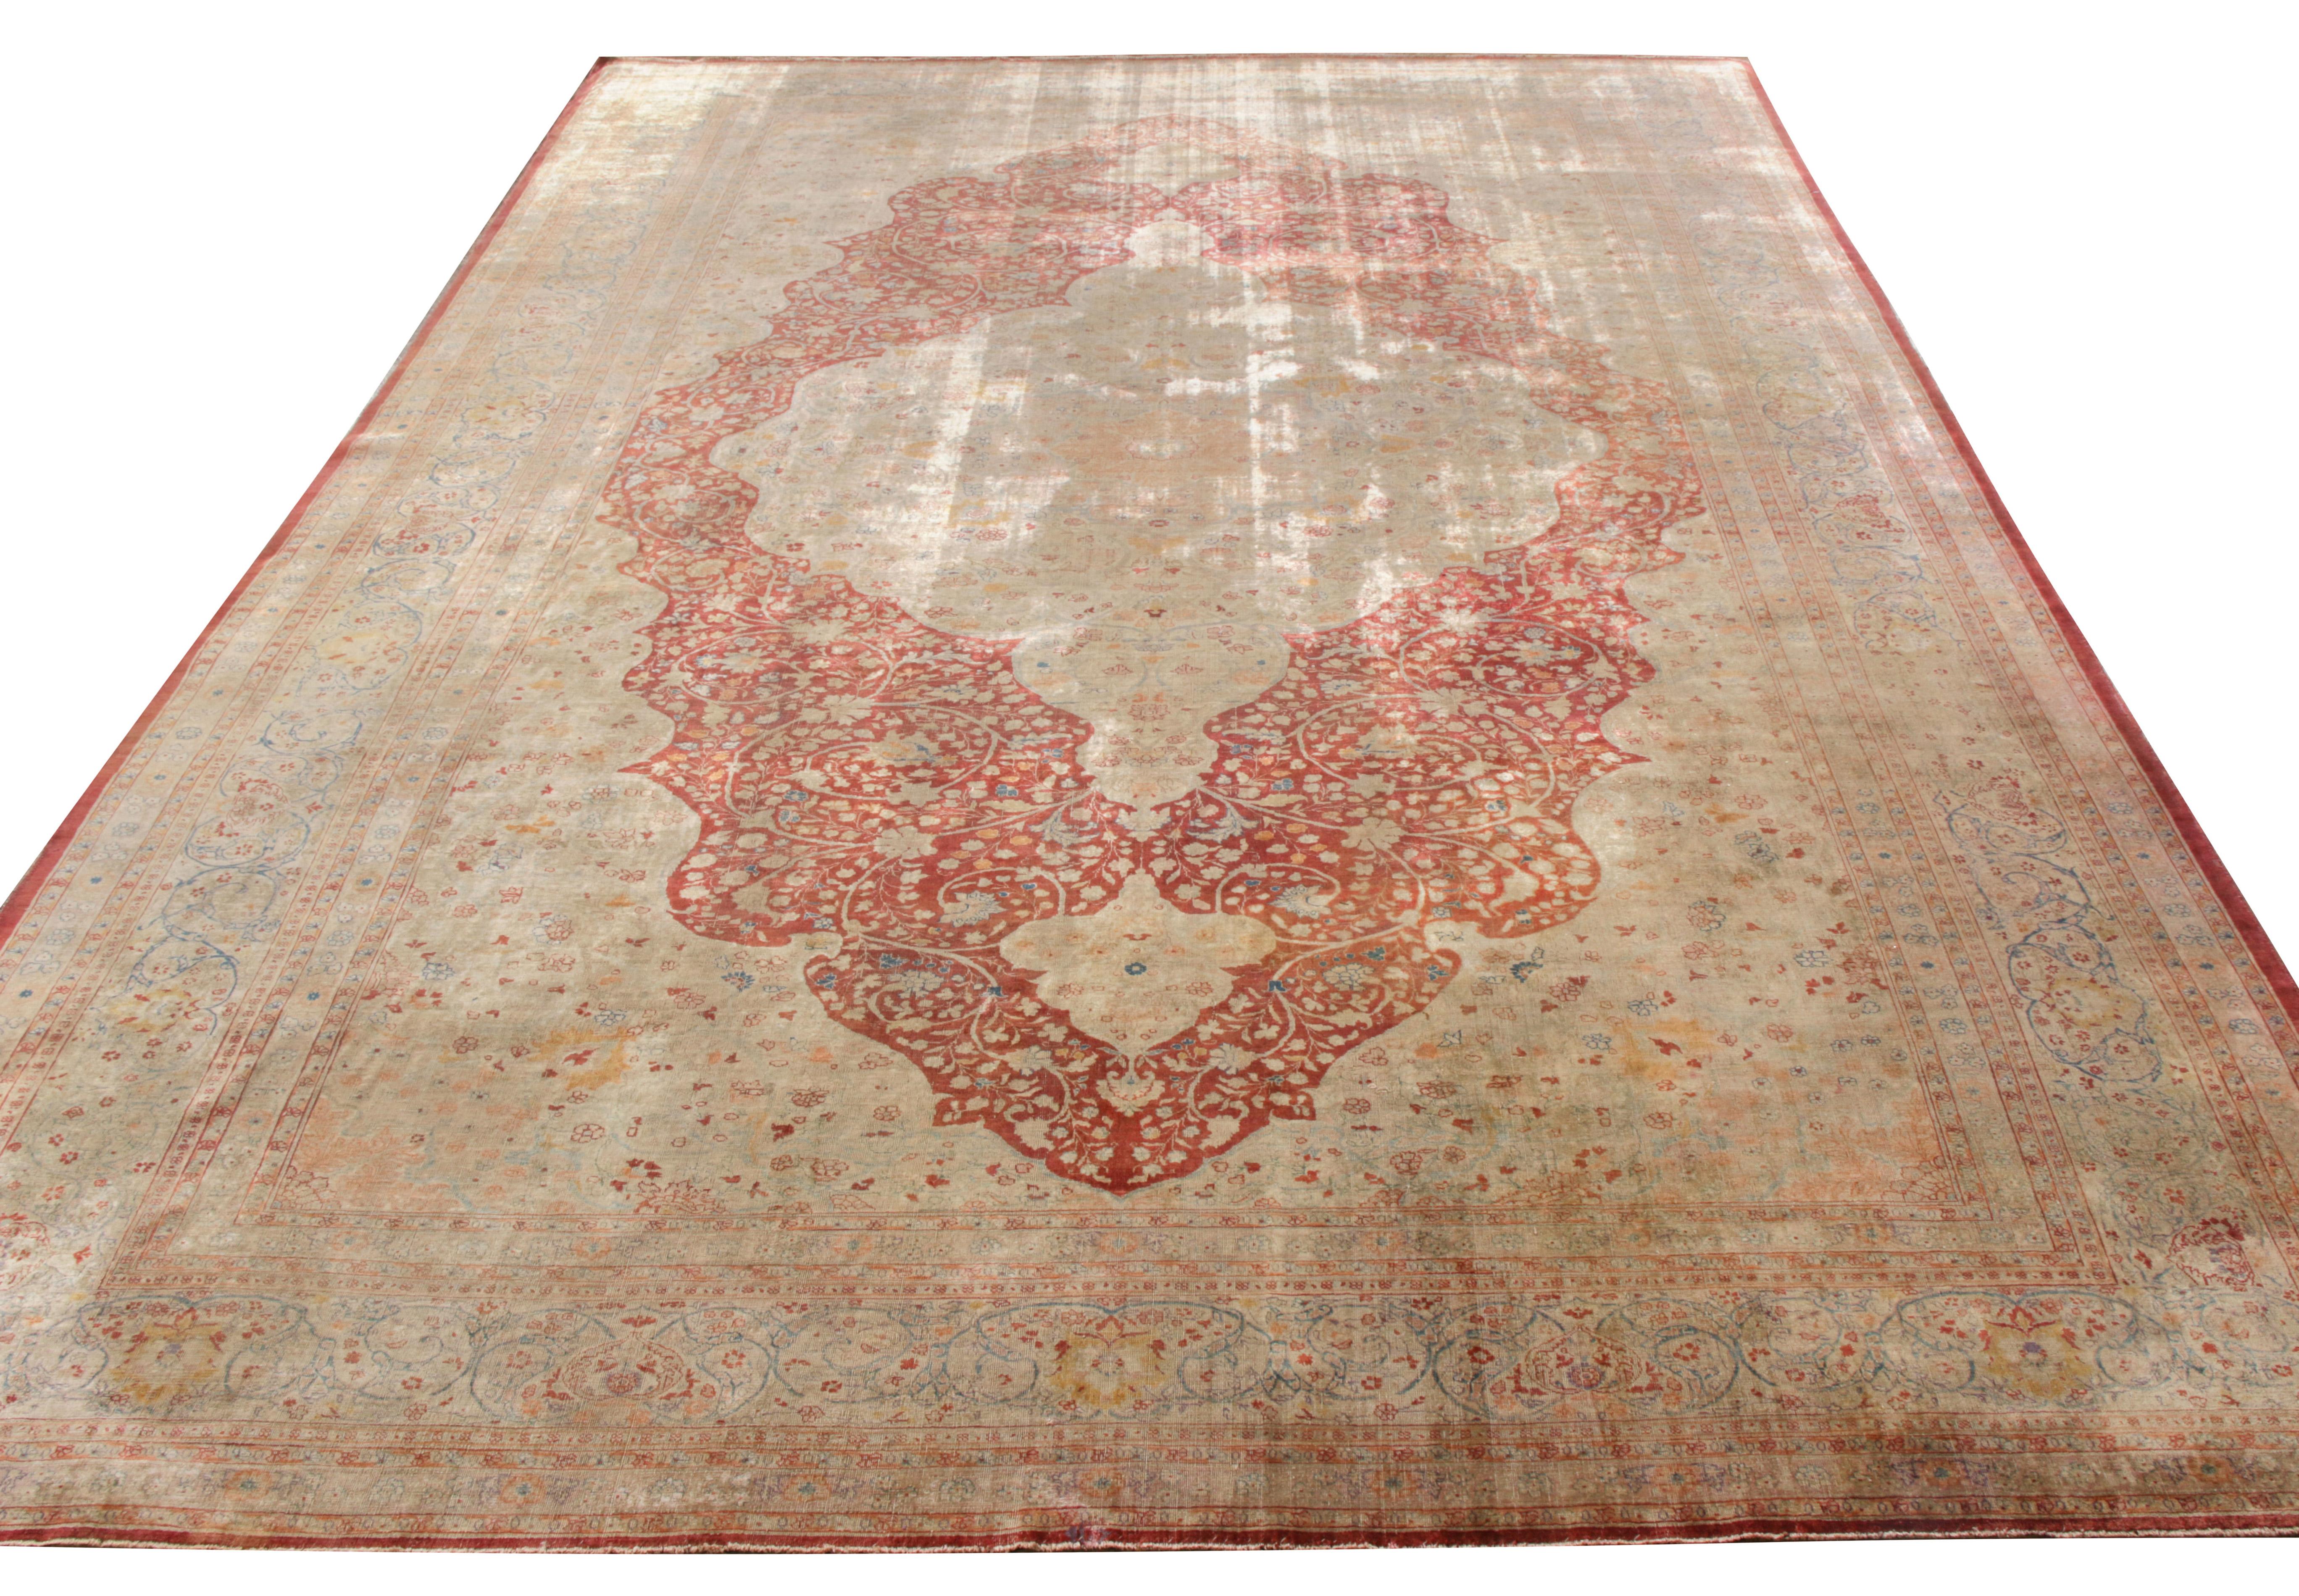 A hand-knotted antique Tabriz rug originating circa 1920-1930 relishing a sumptuous floral medallion in a luscious red and beige-brown hues The striking tones of rich red are set off with accenting hues of blue, white and orange in the vivid